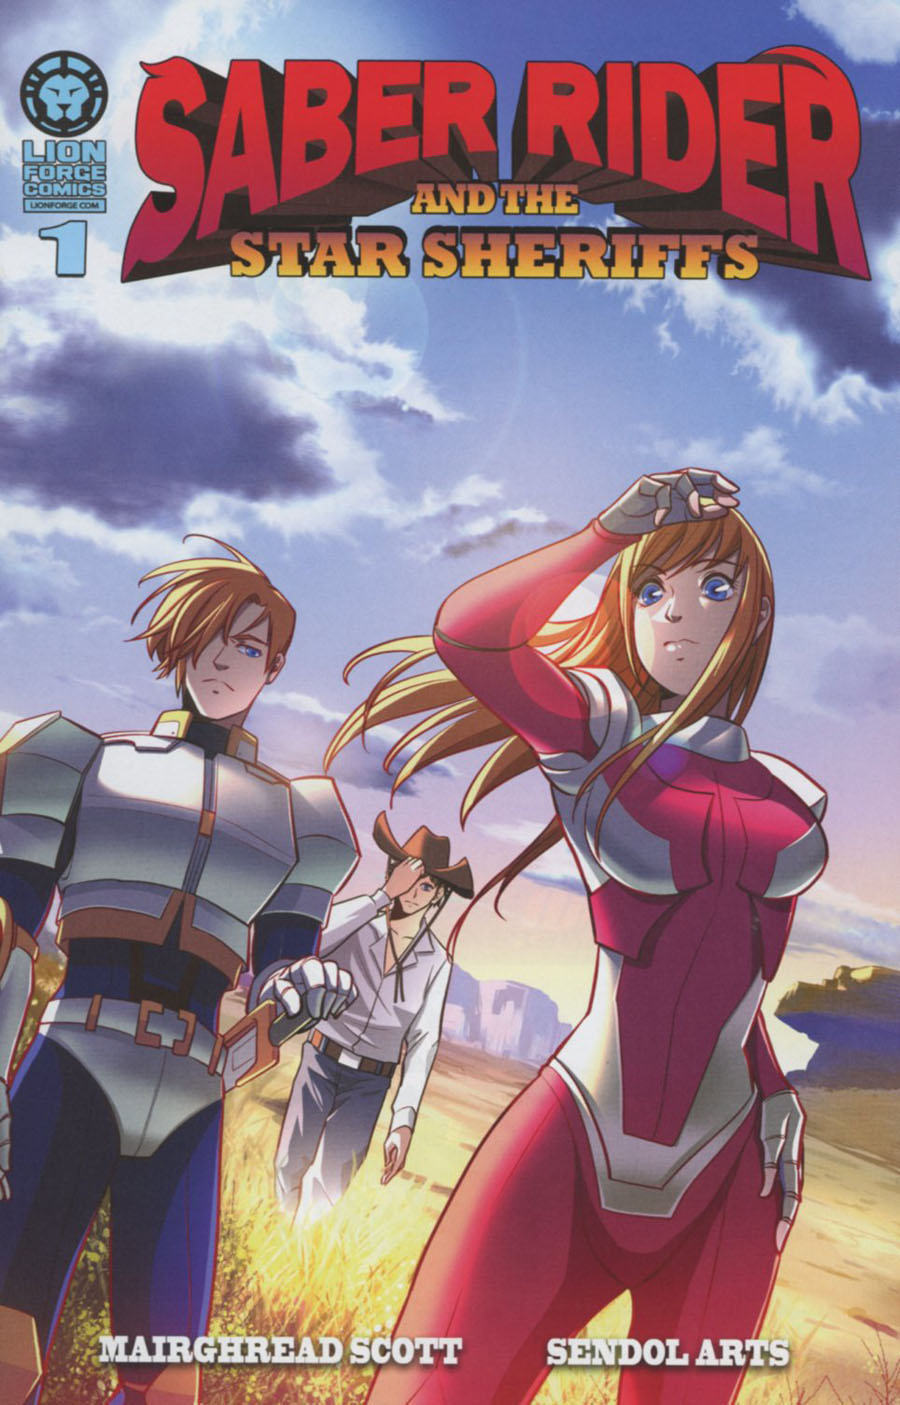 Saber Rider And The Star Sheriffs #1